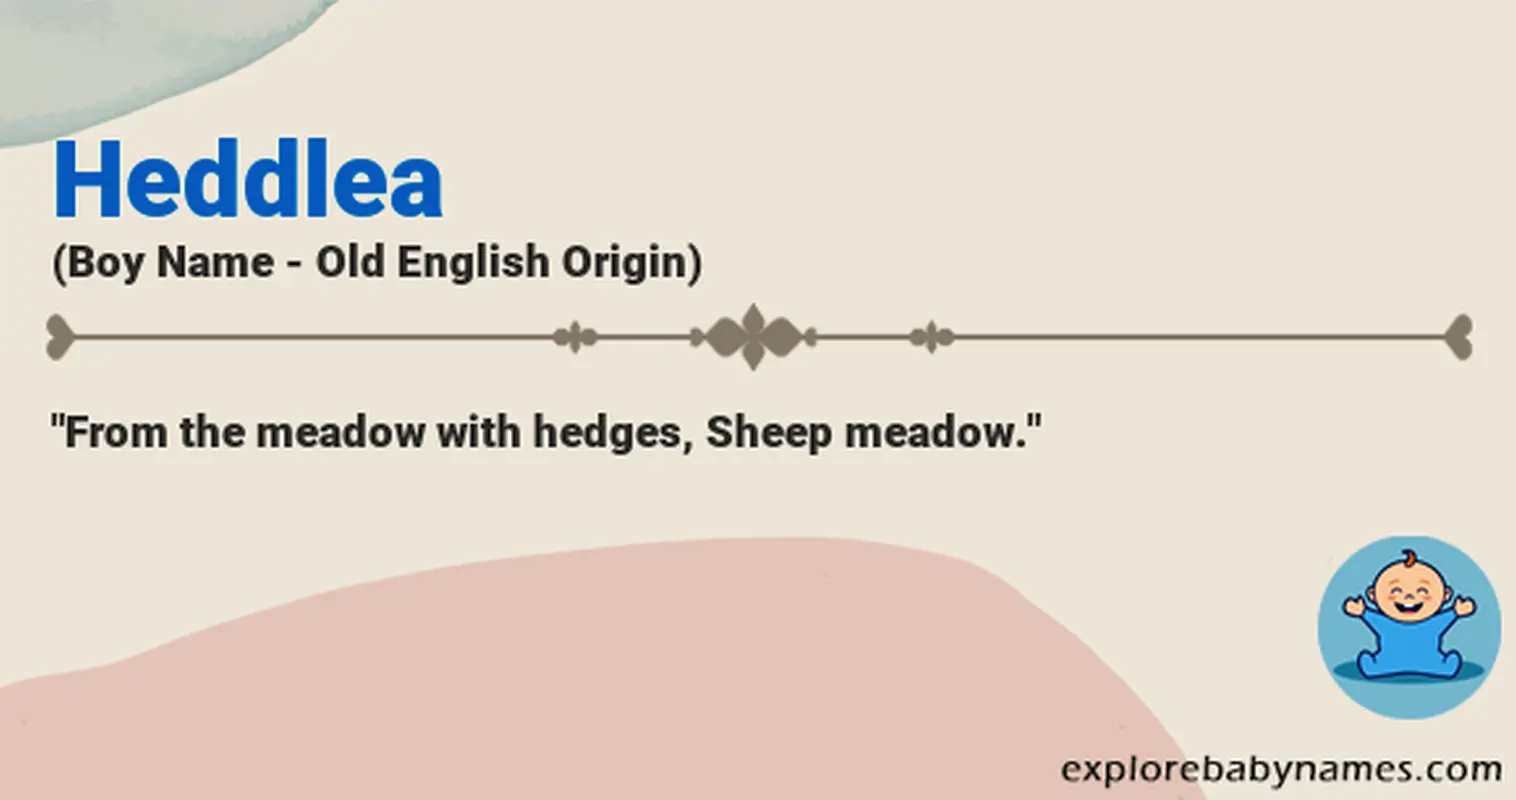 Meaning of Heddlea